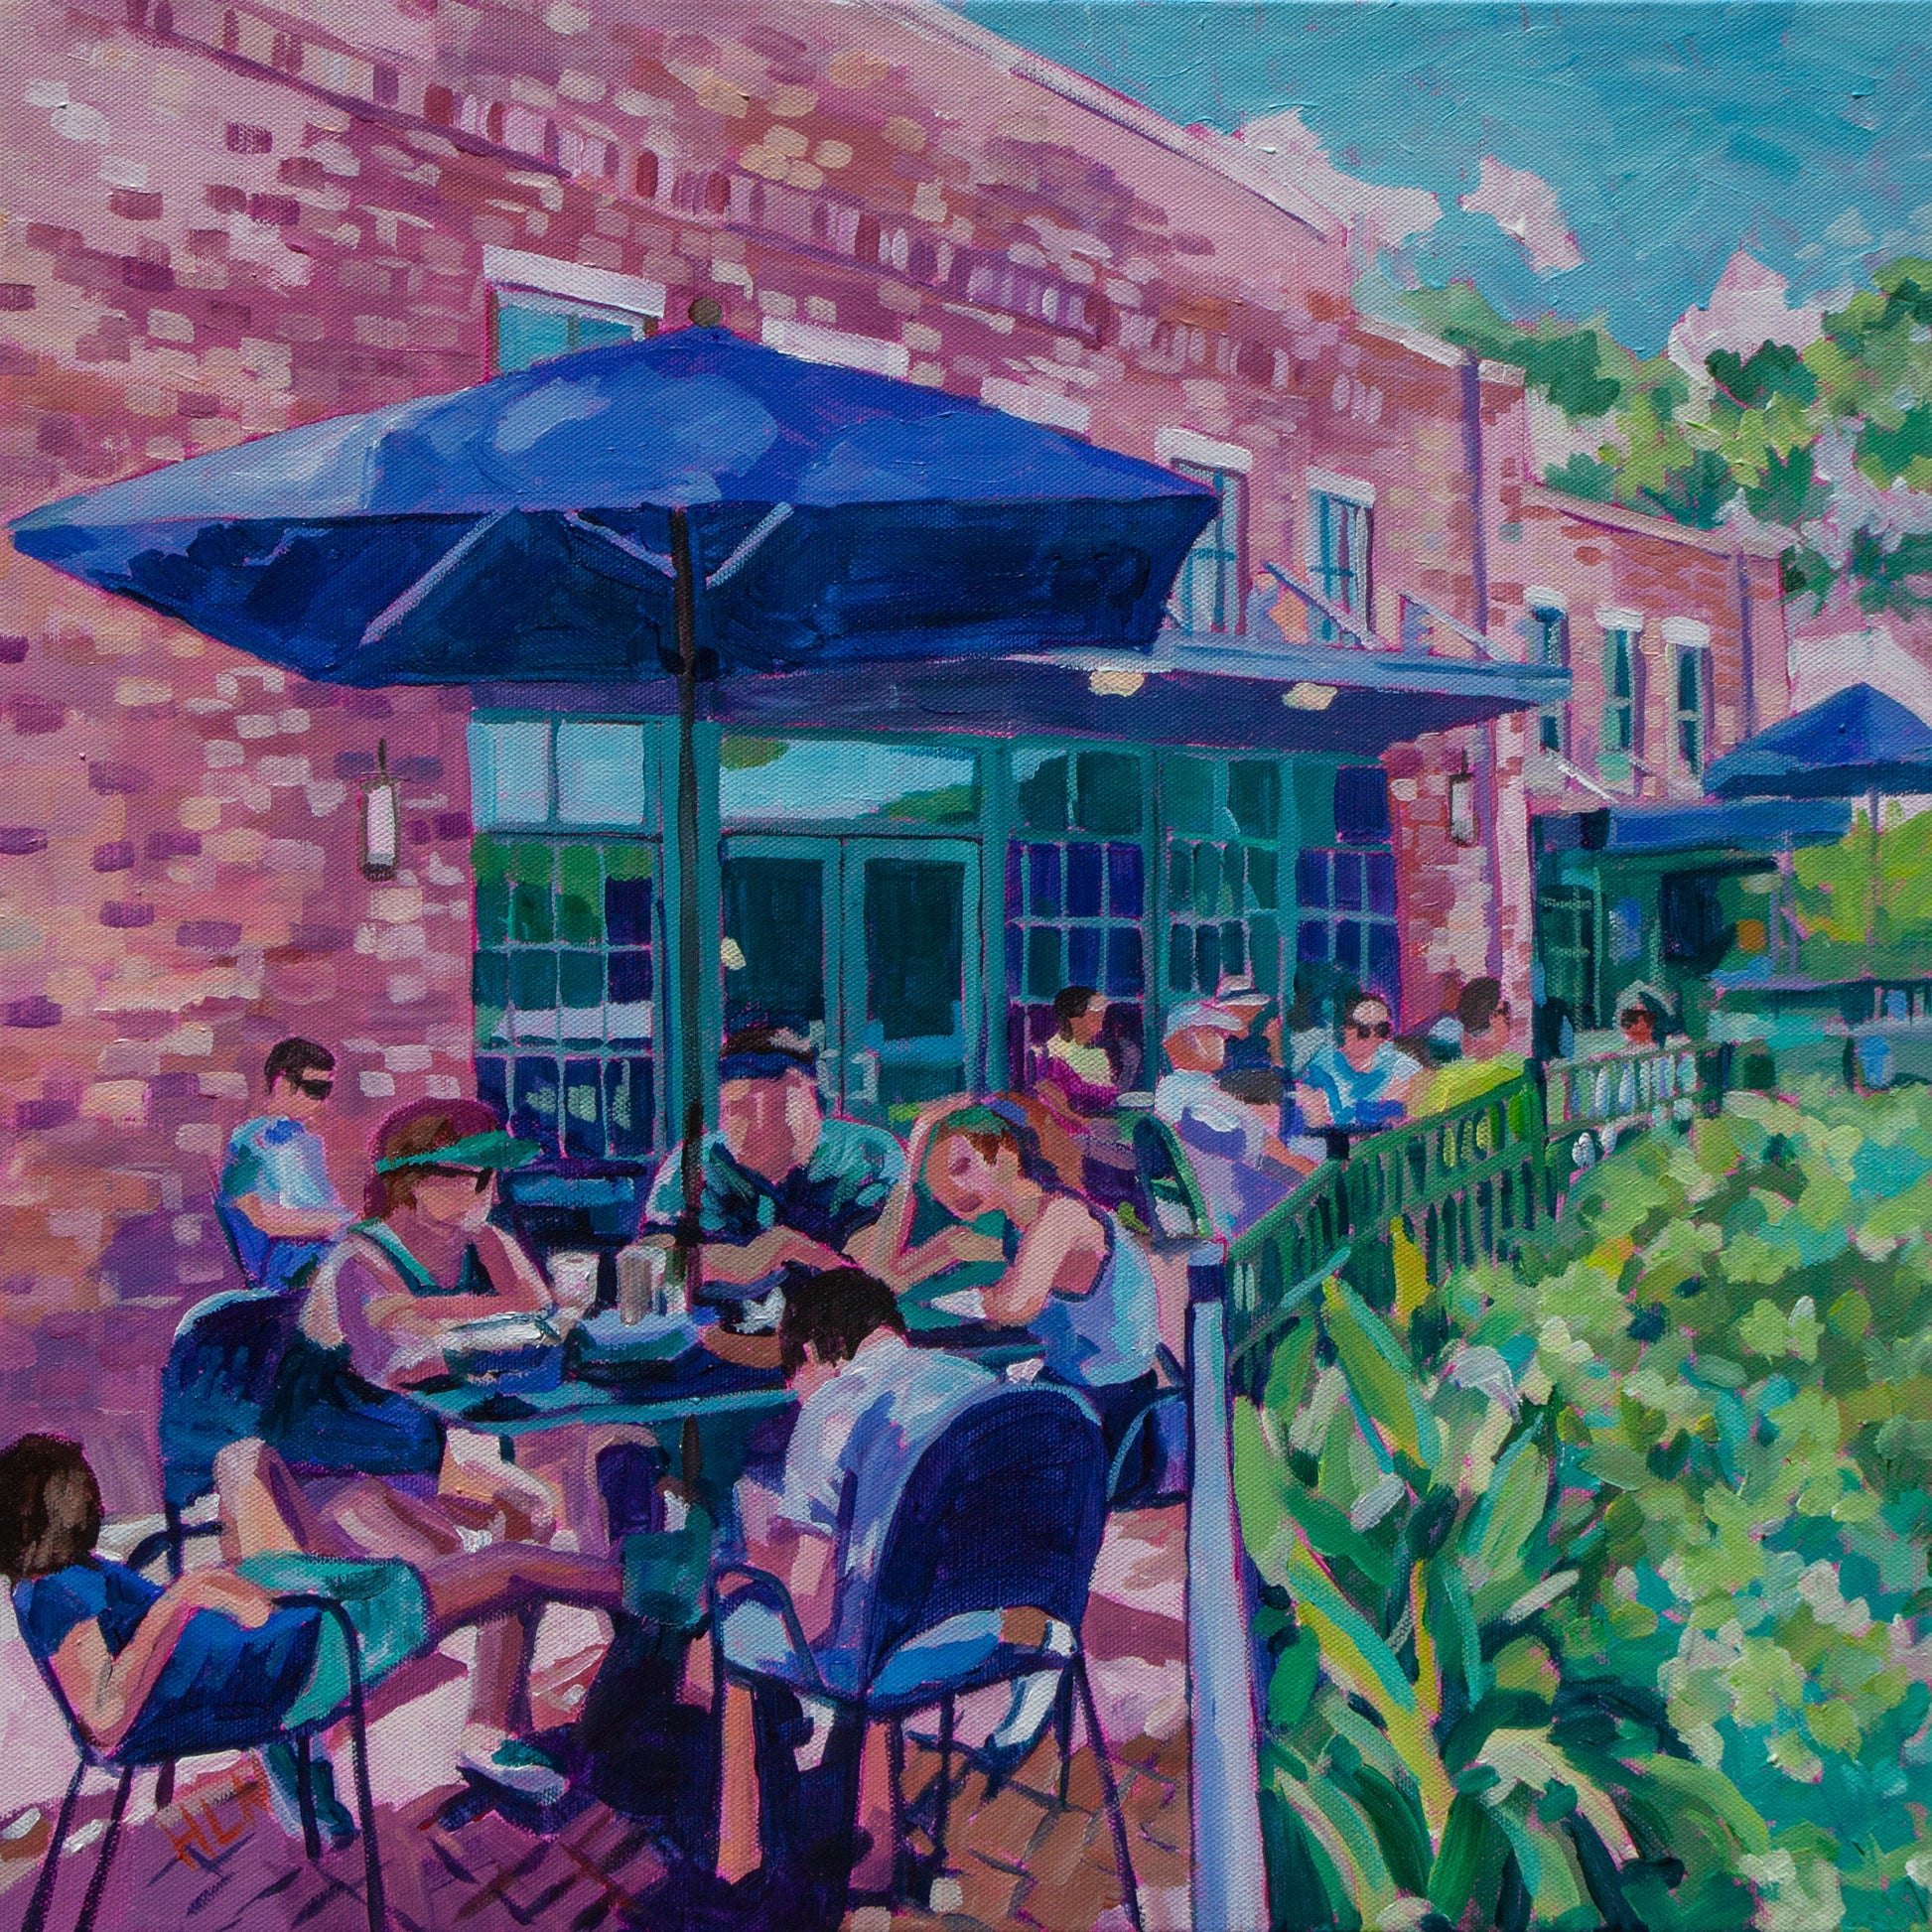 Vibrant impressionist square painting of charming small town Winter Garden Florida with people outside eating and teal umbrellas on Plant Street downtown